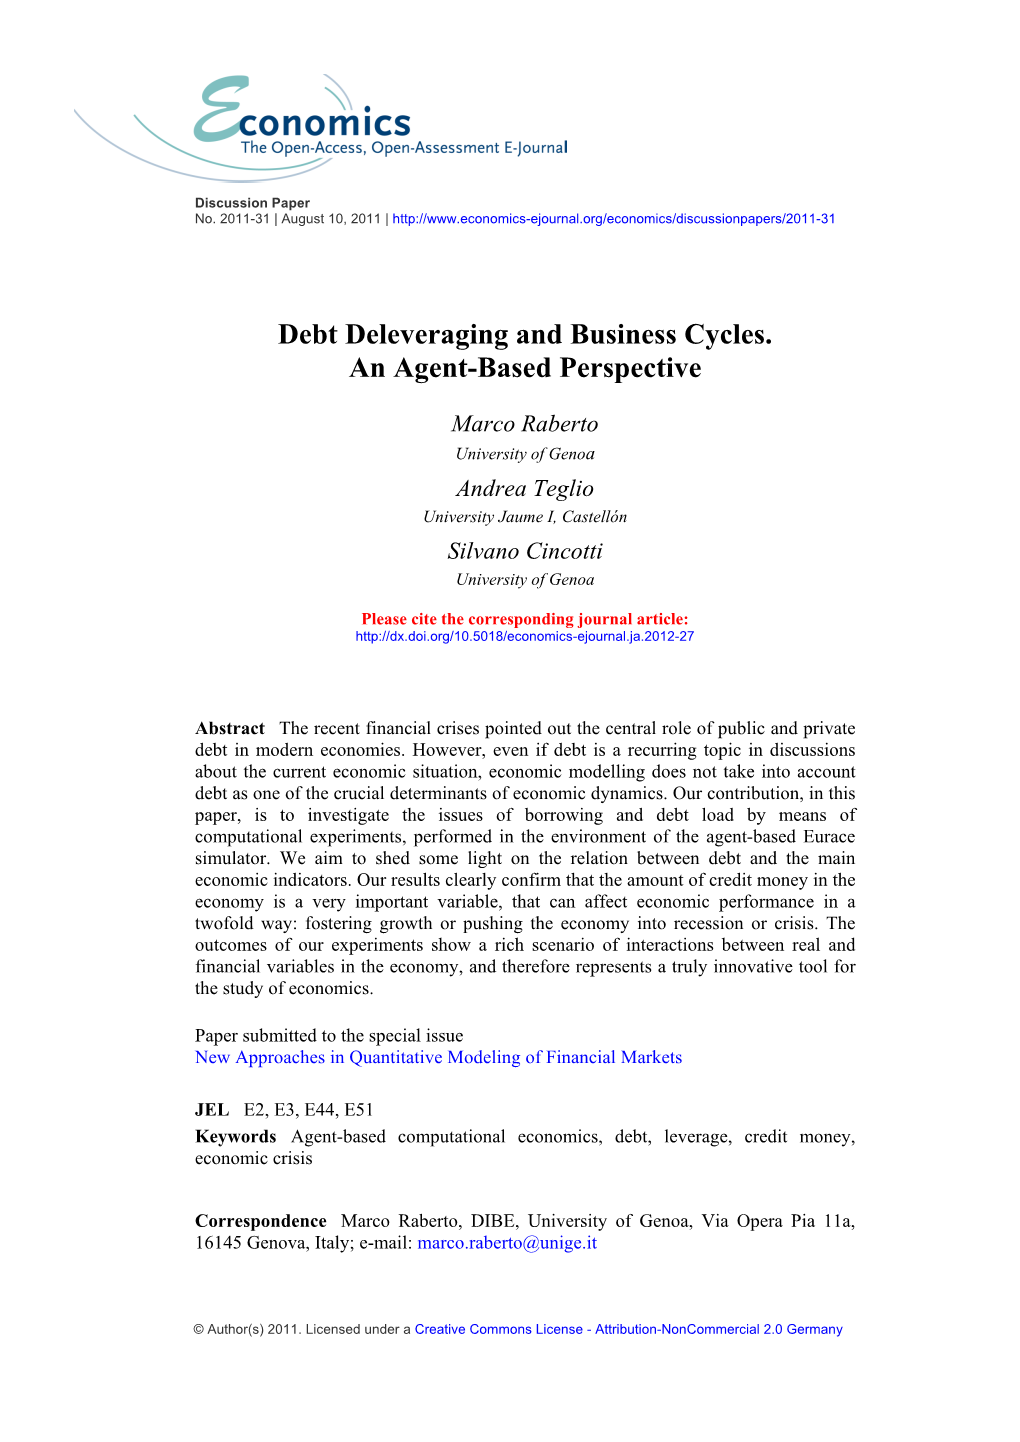 Debt Deleveraging and Business Cycles. an Agent-Based Perspective